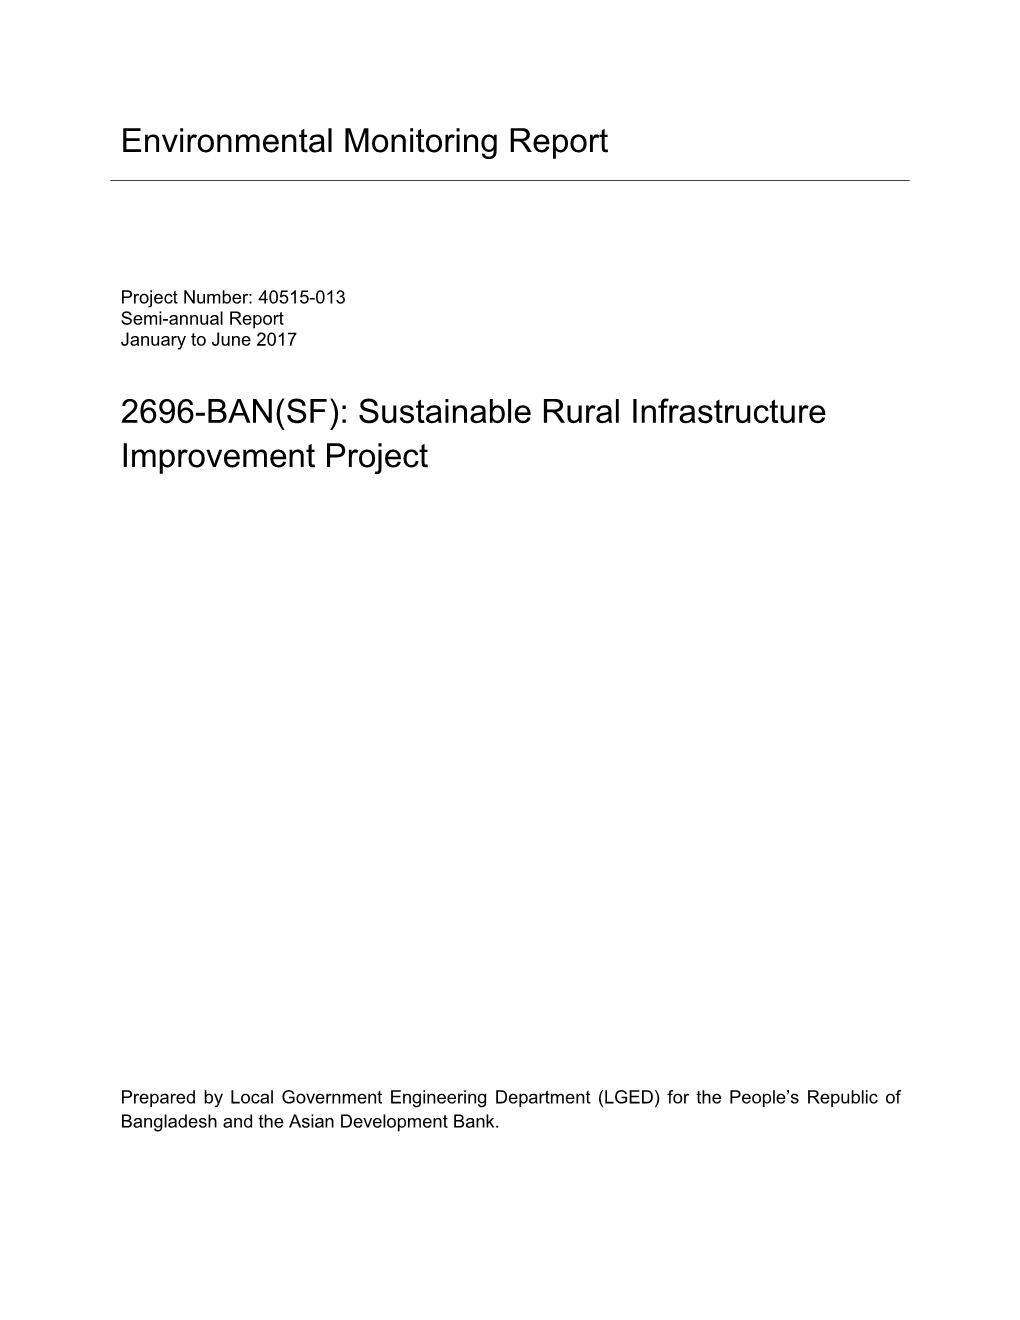 Sustainable Rural Infrastructure Improvement Project